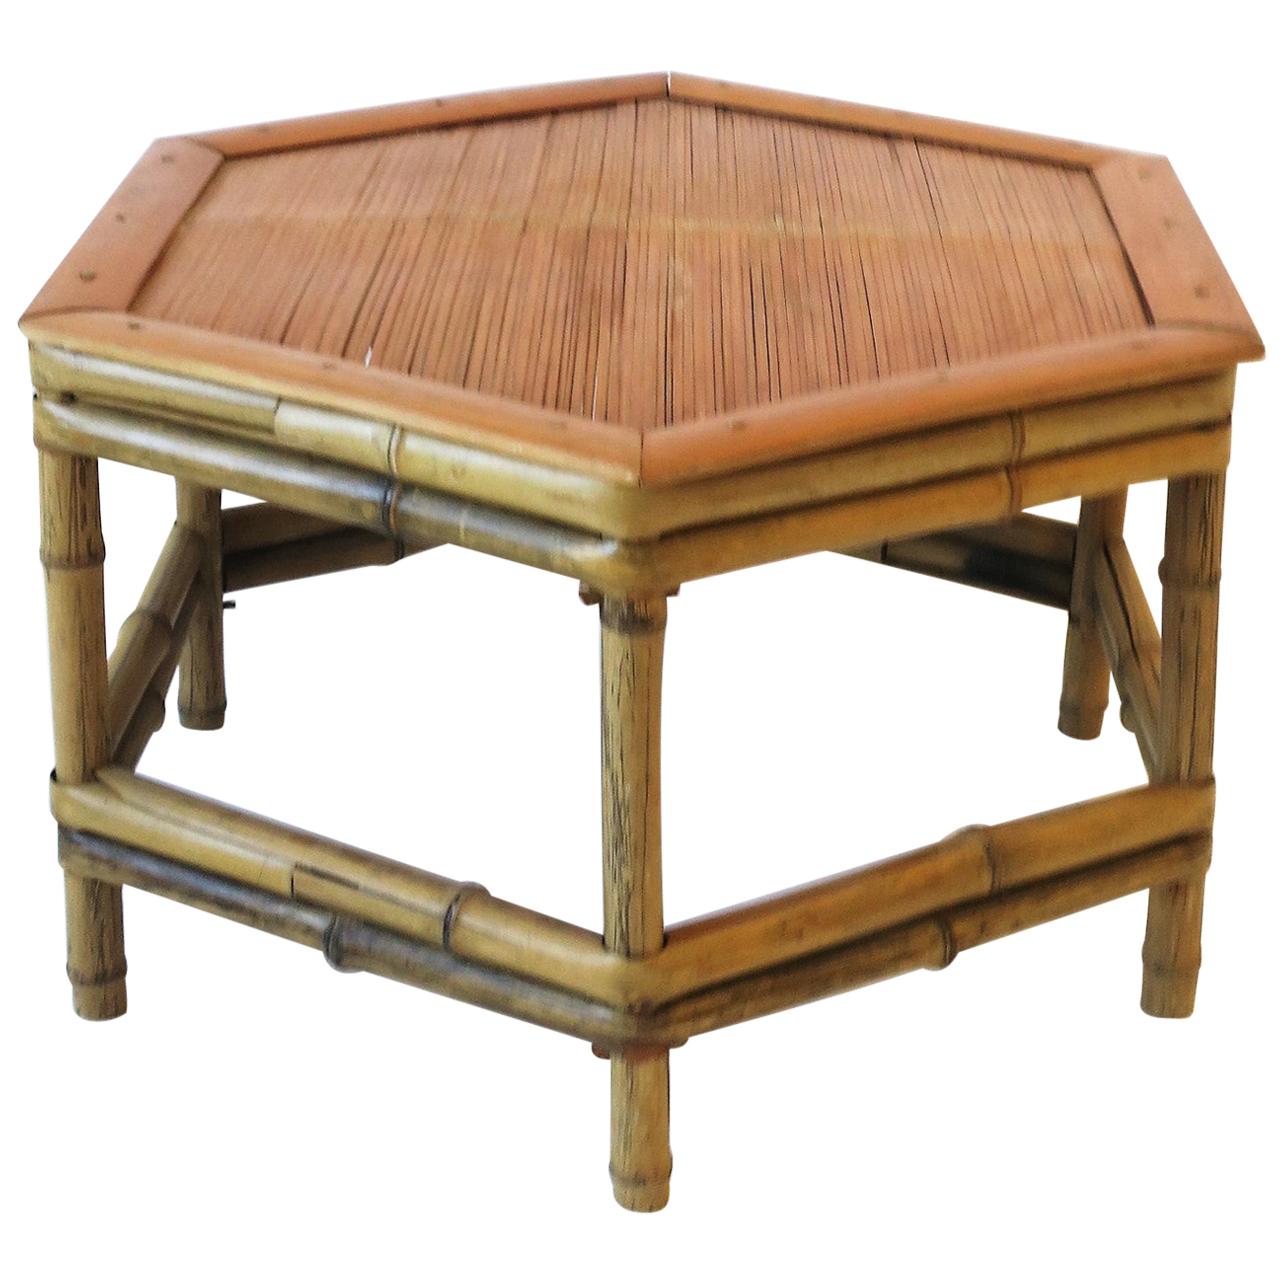 Bamboo Pedestal Side Table or Plant Stand, Low